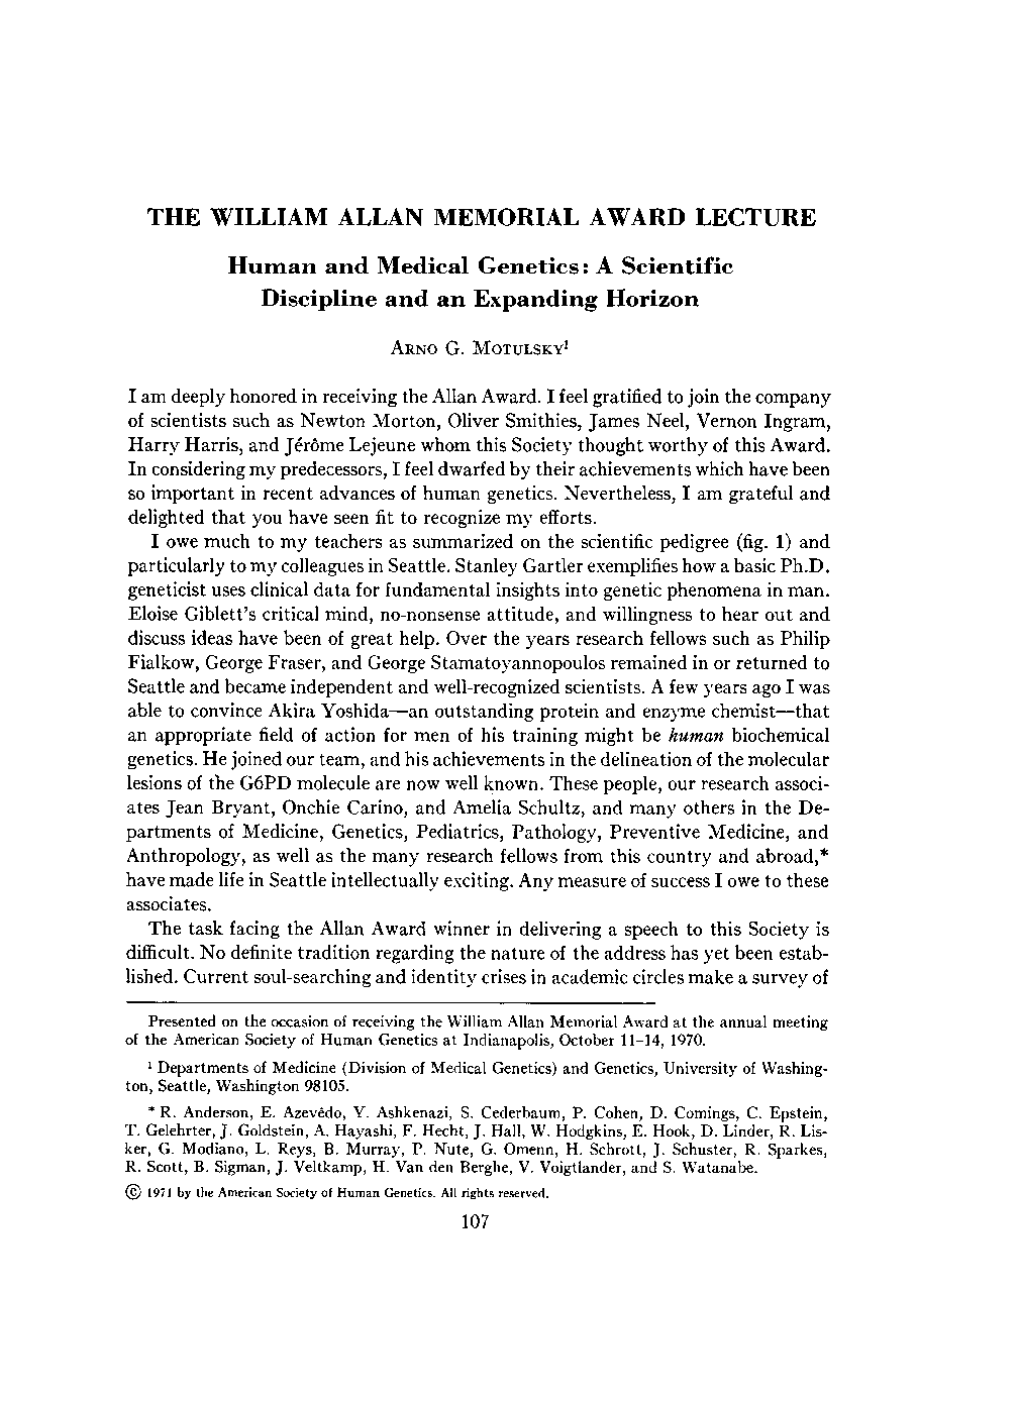 THE WILLIAM ALLAN MEMORIAL AWARD LECTURE Human and Medical Genetics: a Scientific Discipline and an Expanding Horizon